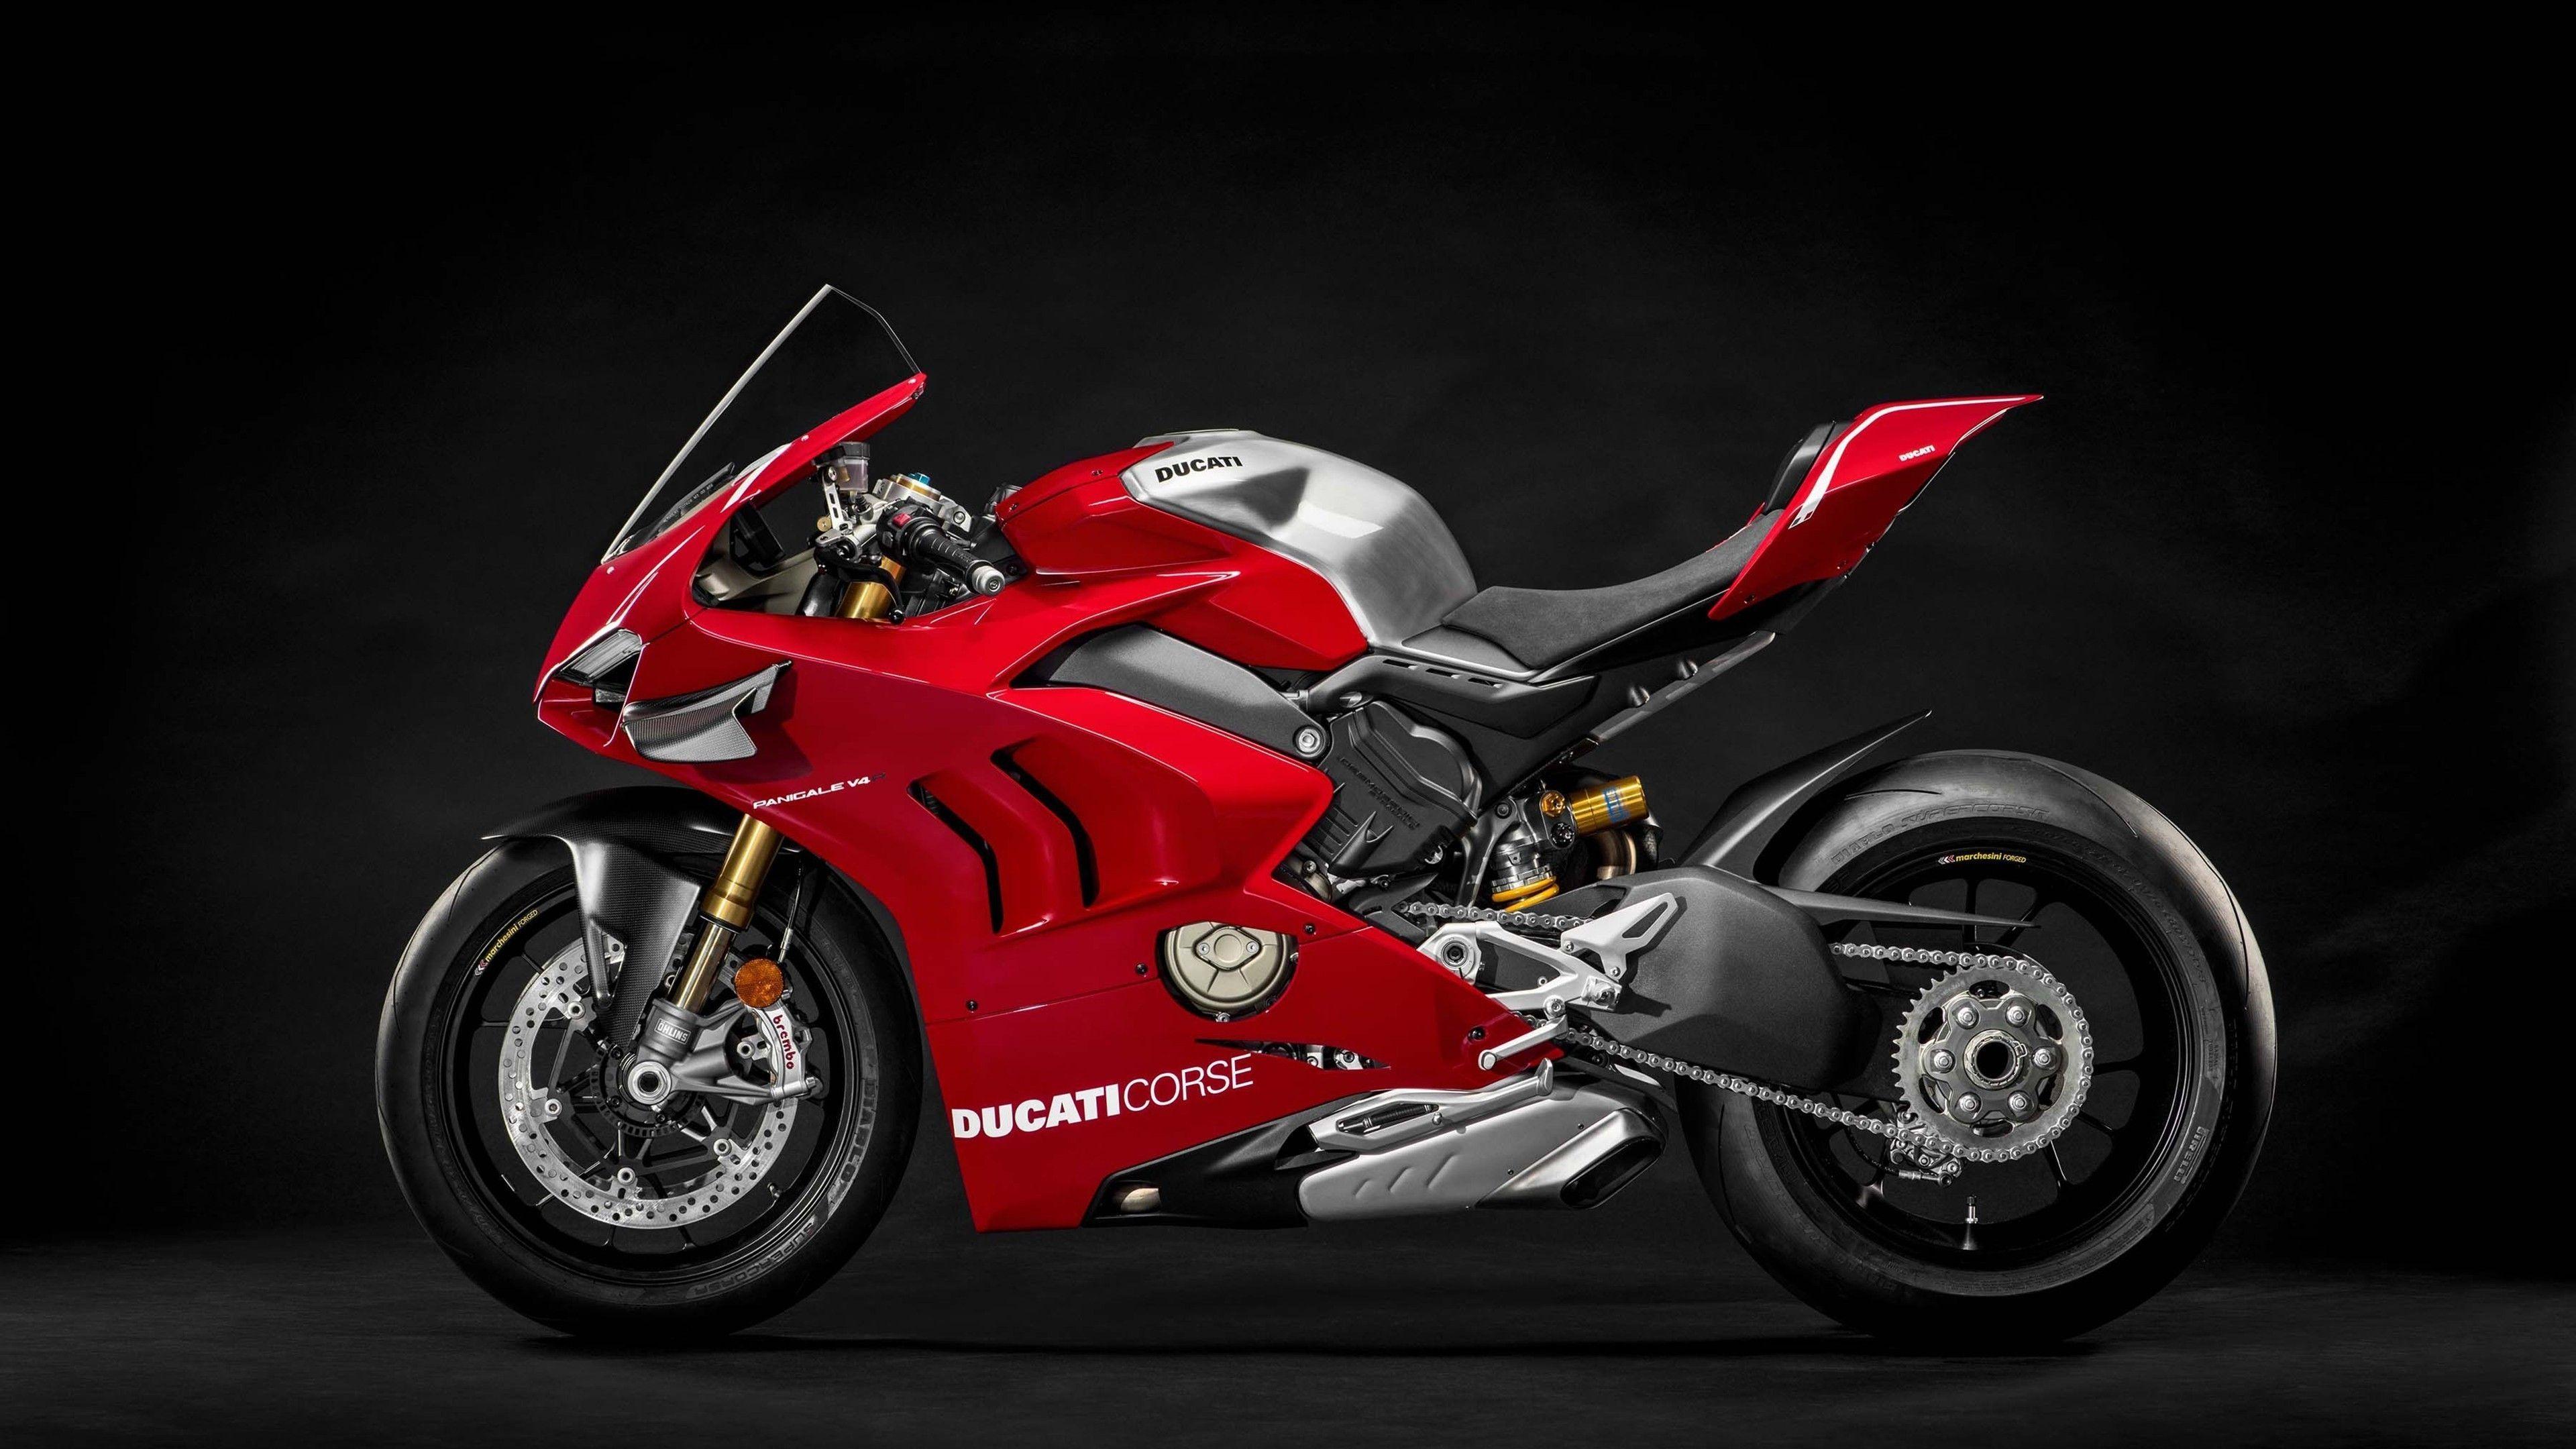 Ducati Panigale V4 4k Wallpapers Top Free Ducati Panigale V4 4k Backgrounds Wallpaperaccess